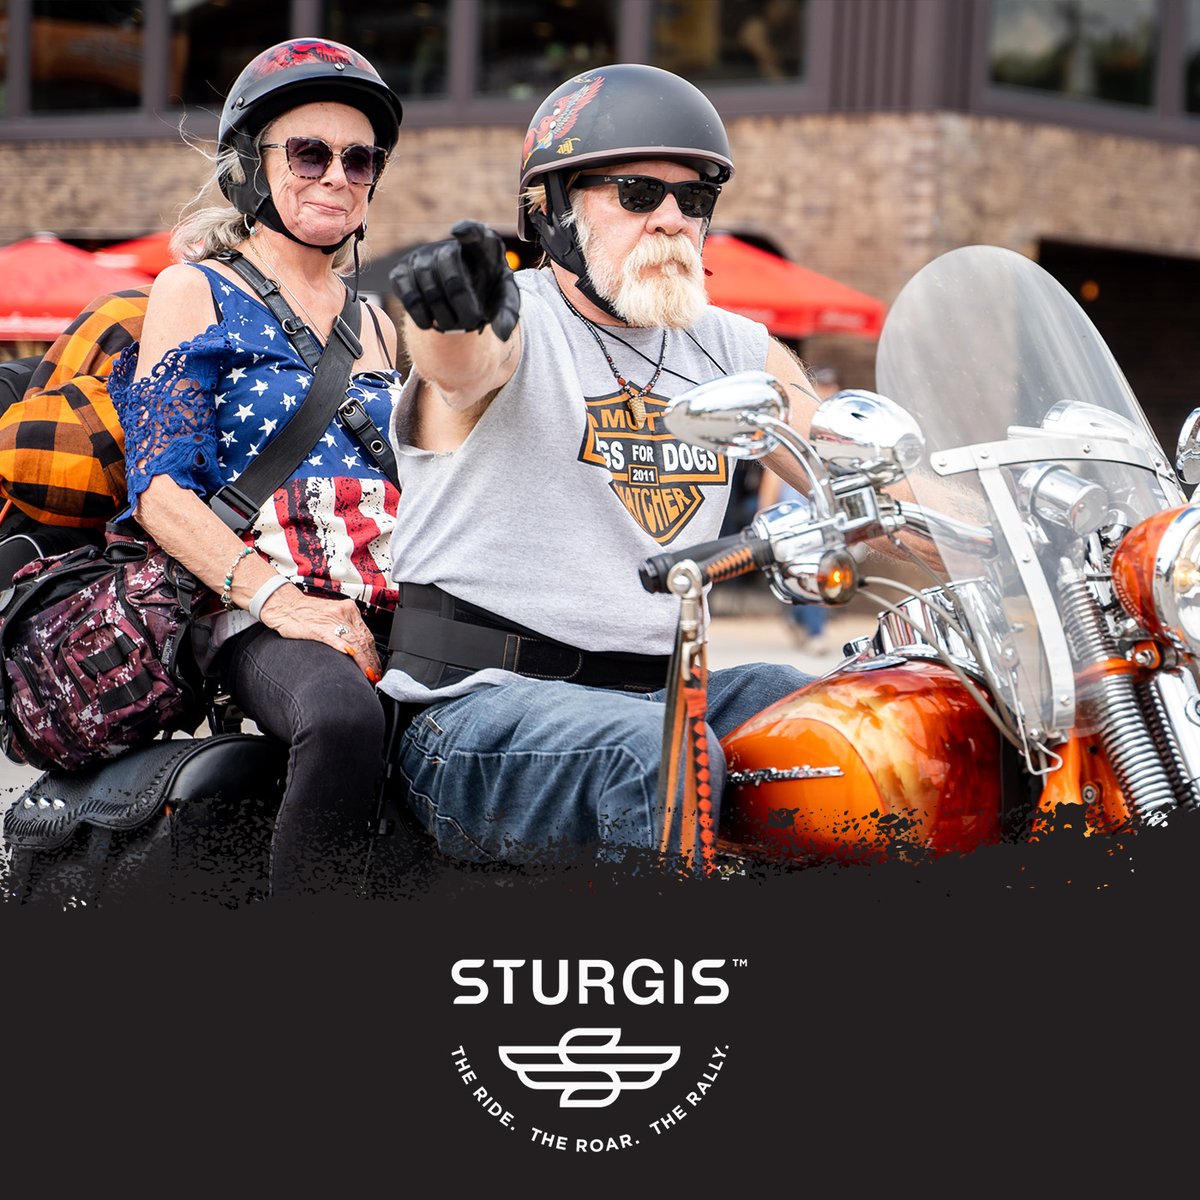 You! It's almost two more months until Rally time! - #sturgis #sturgisrally